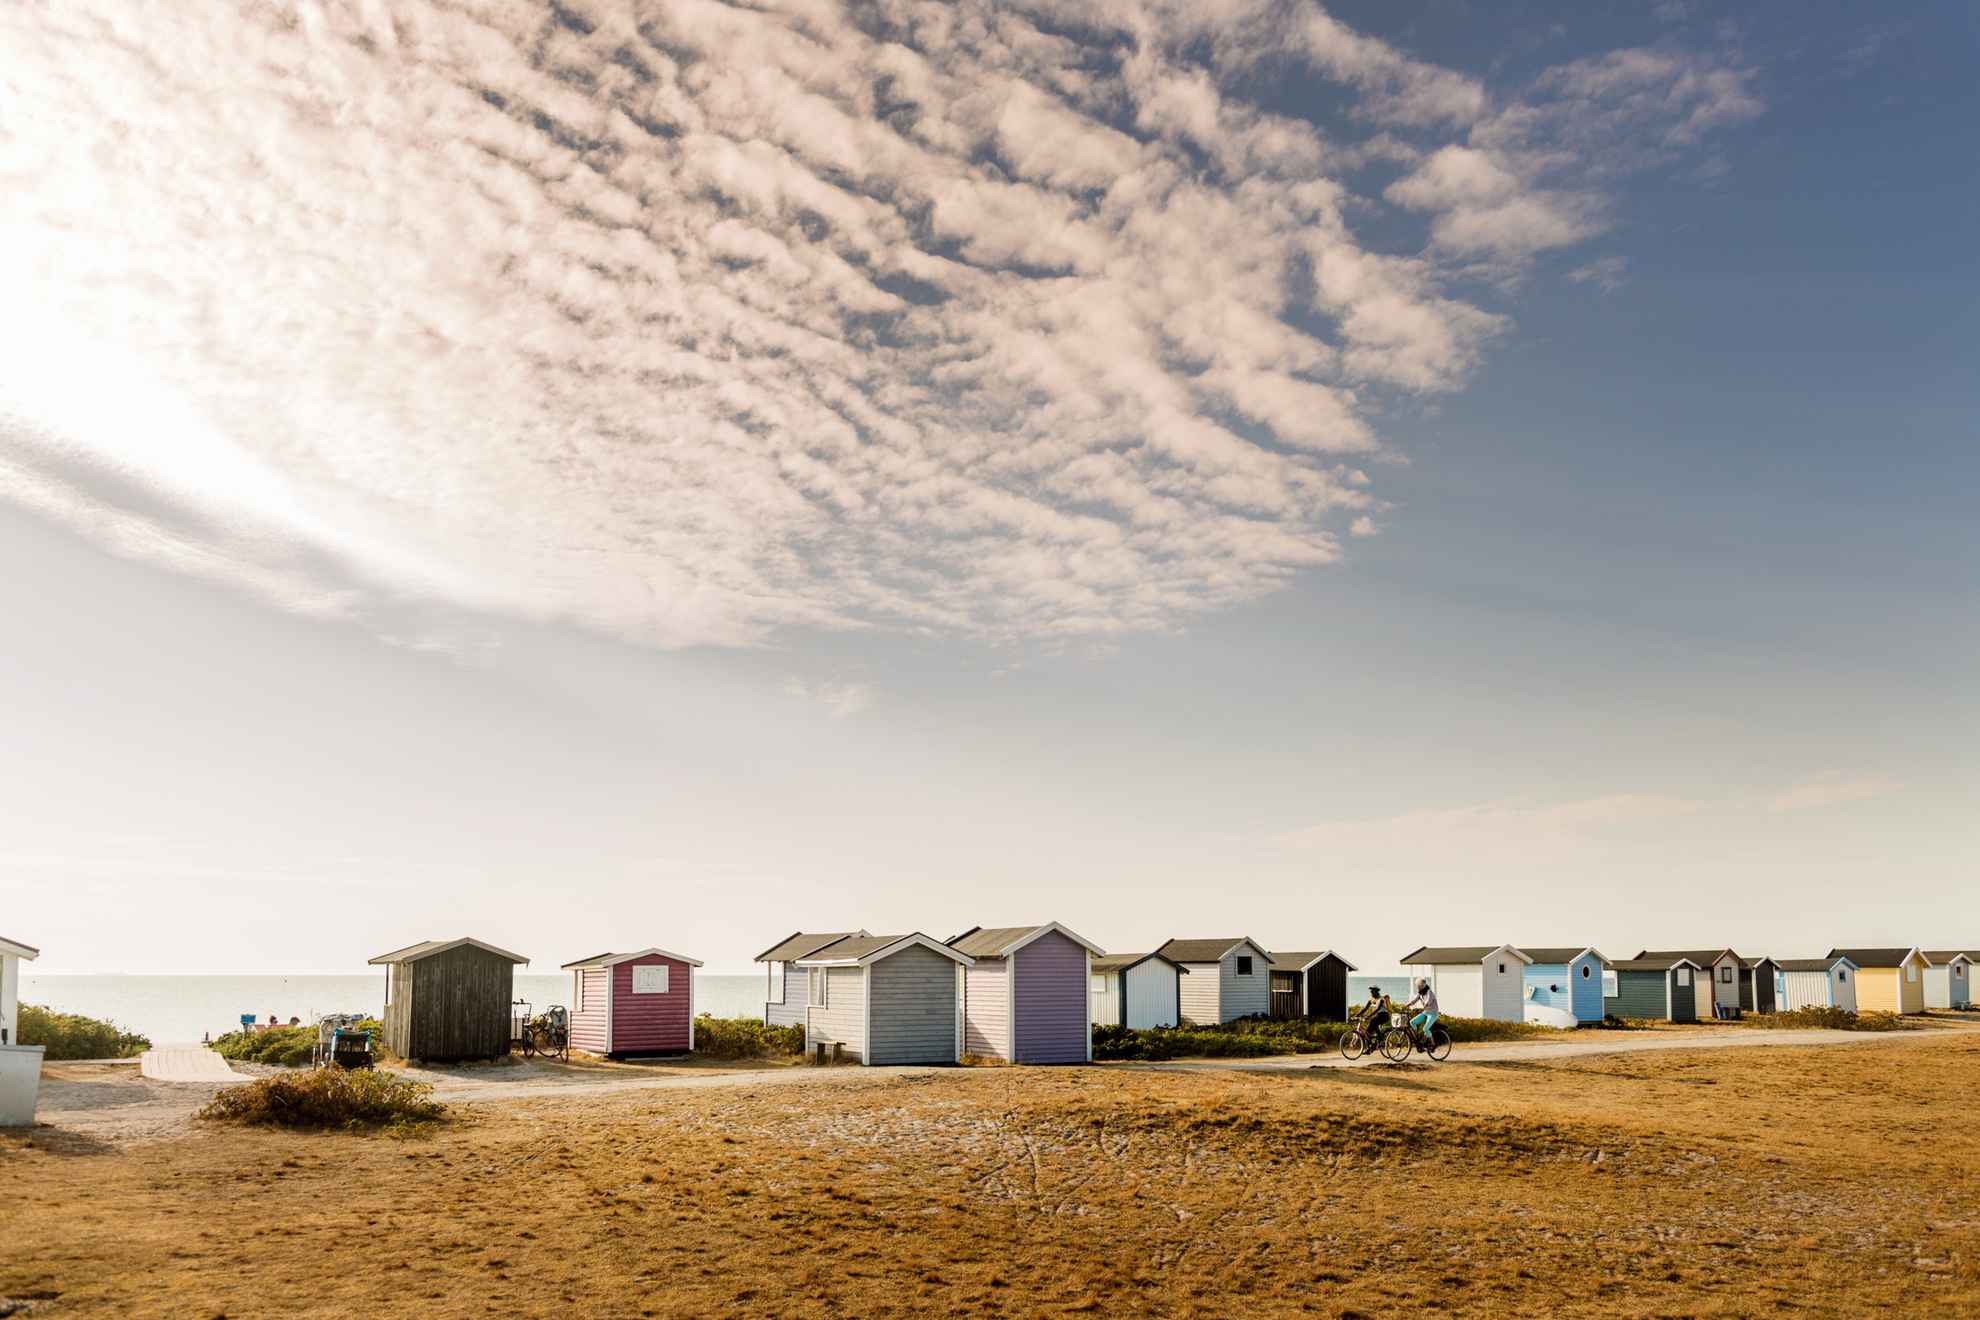 The back of colourful boathouses lined up on the beach. The sea is visible in the background.